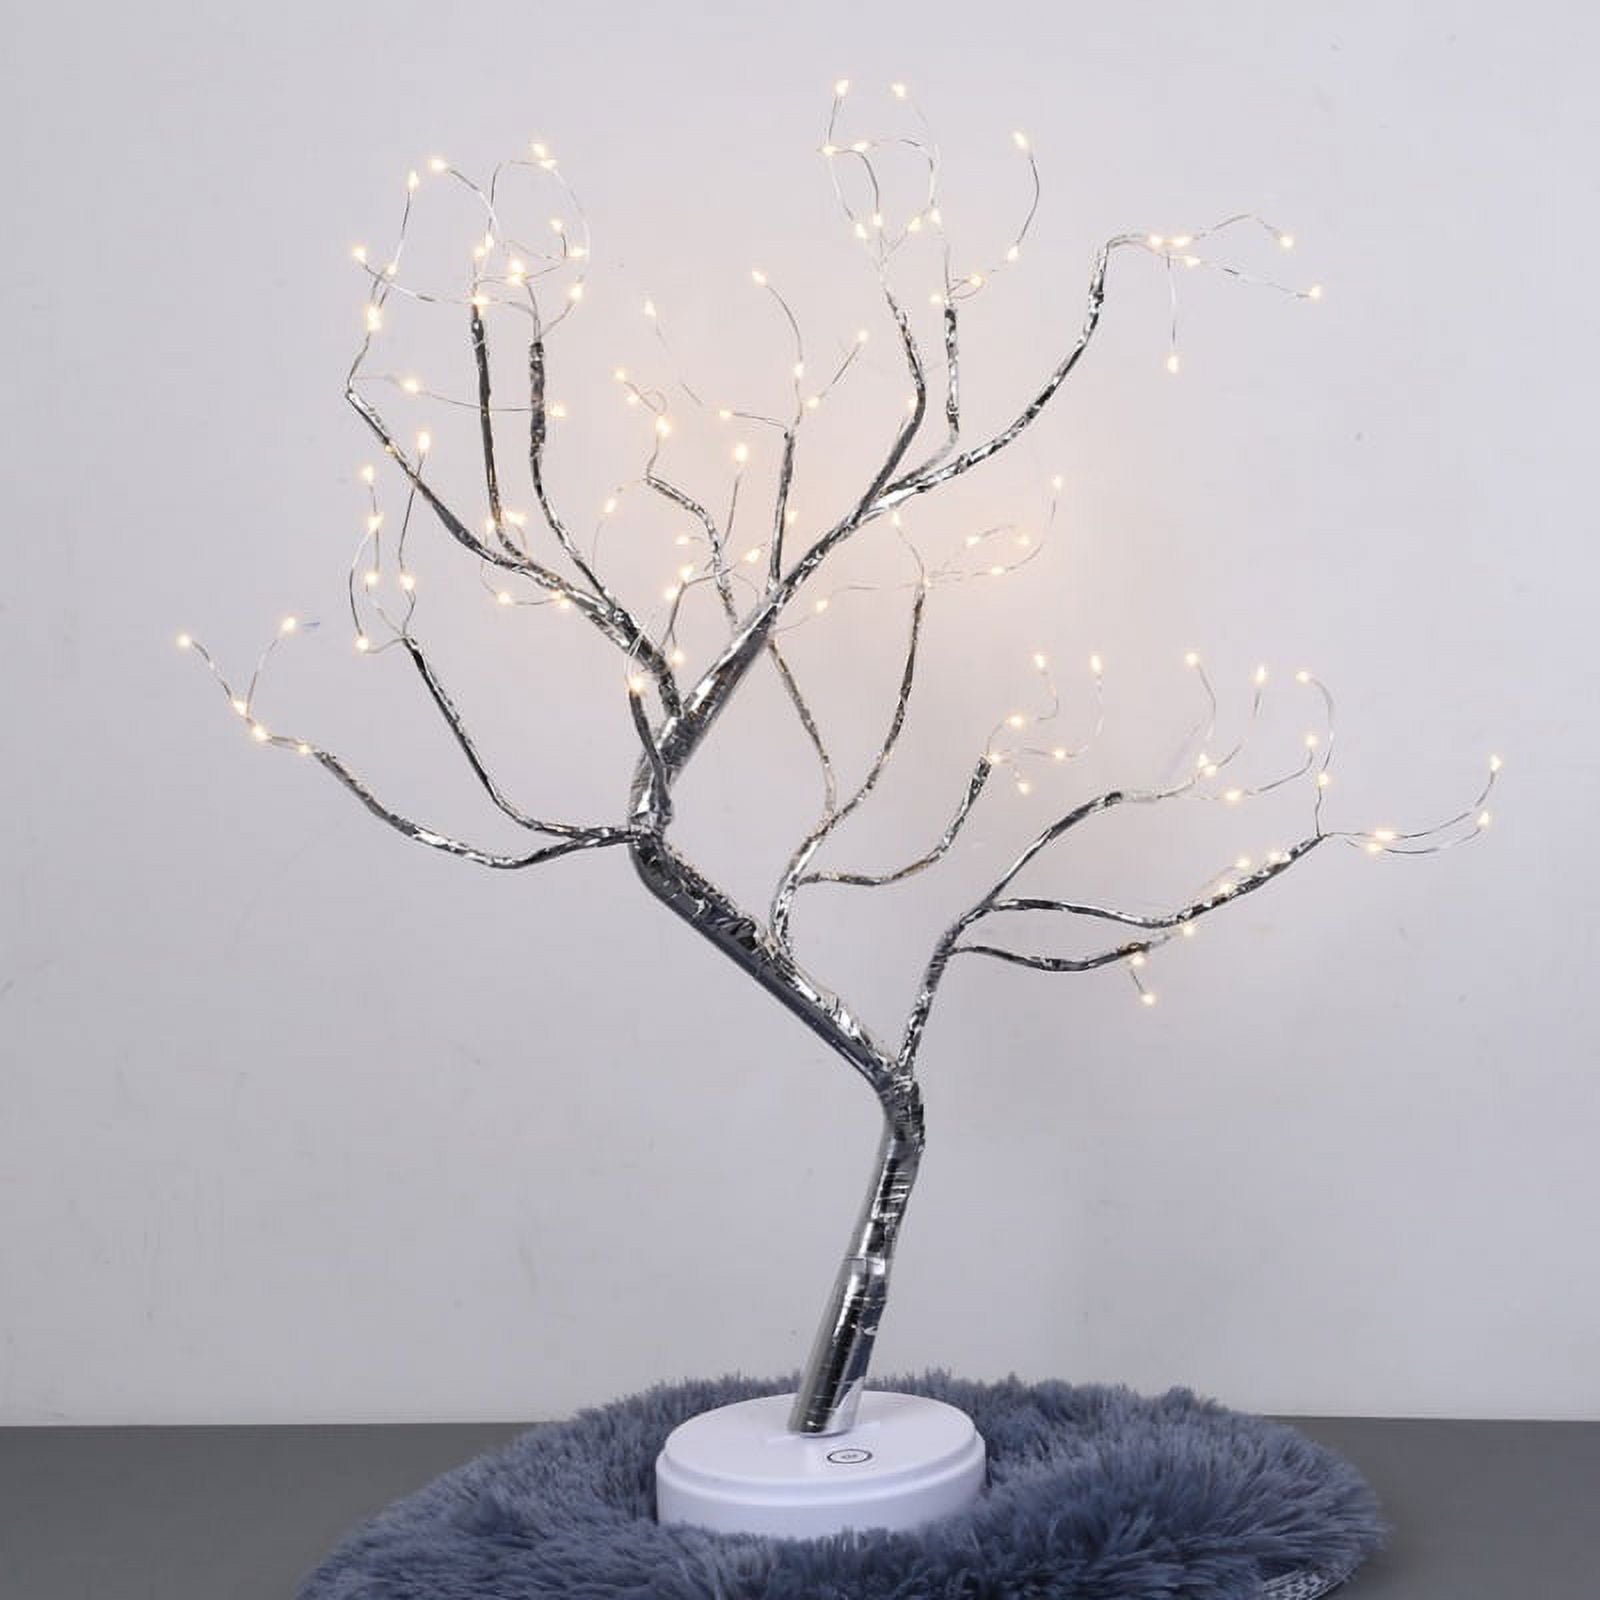  20 Inch Tabletop Bonsai Tree Light Touch Switch Waterproof 108  LED Lamp Beads Copper Wire Light Adjustable Branches DIY Artificial Tree  Lamp for Party Wedding Festival Christmas Home Decor 